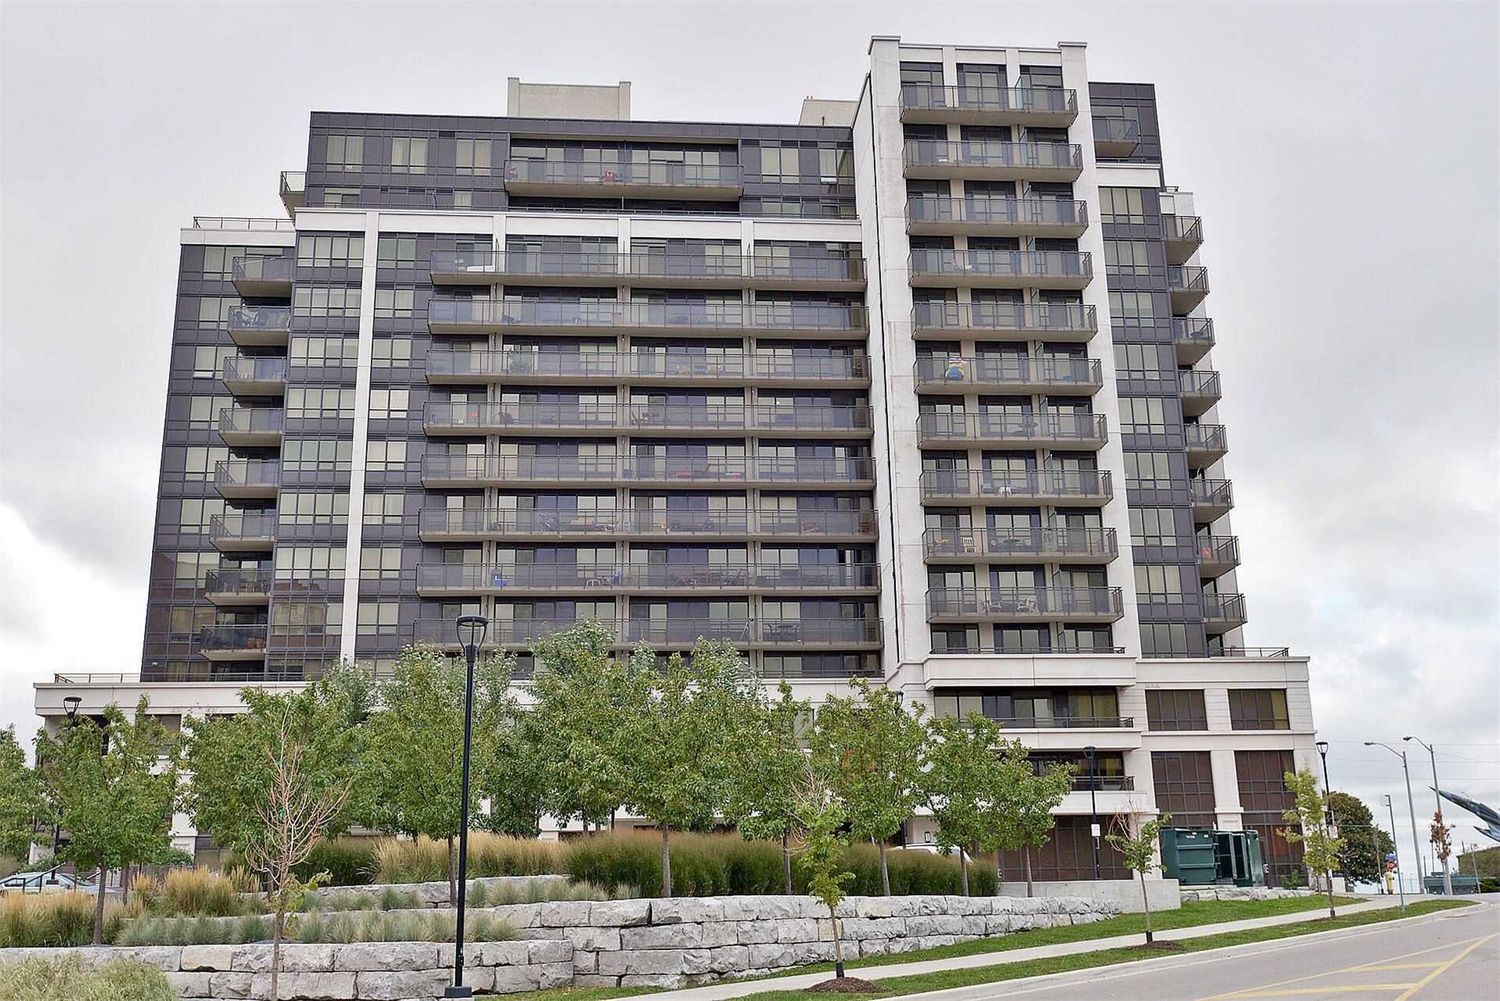 1070 Sheppard Avenue W. M1 | M2 Condos is located in  North York, Toronto - image #1 of 3